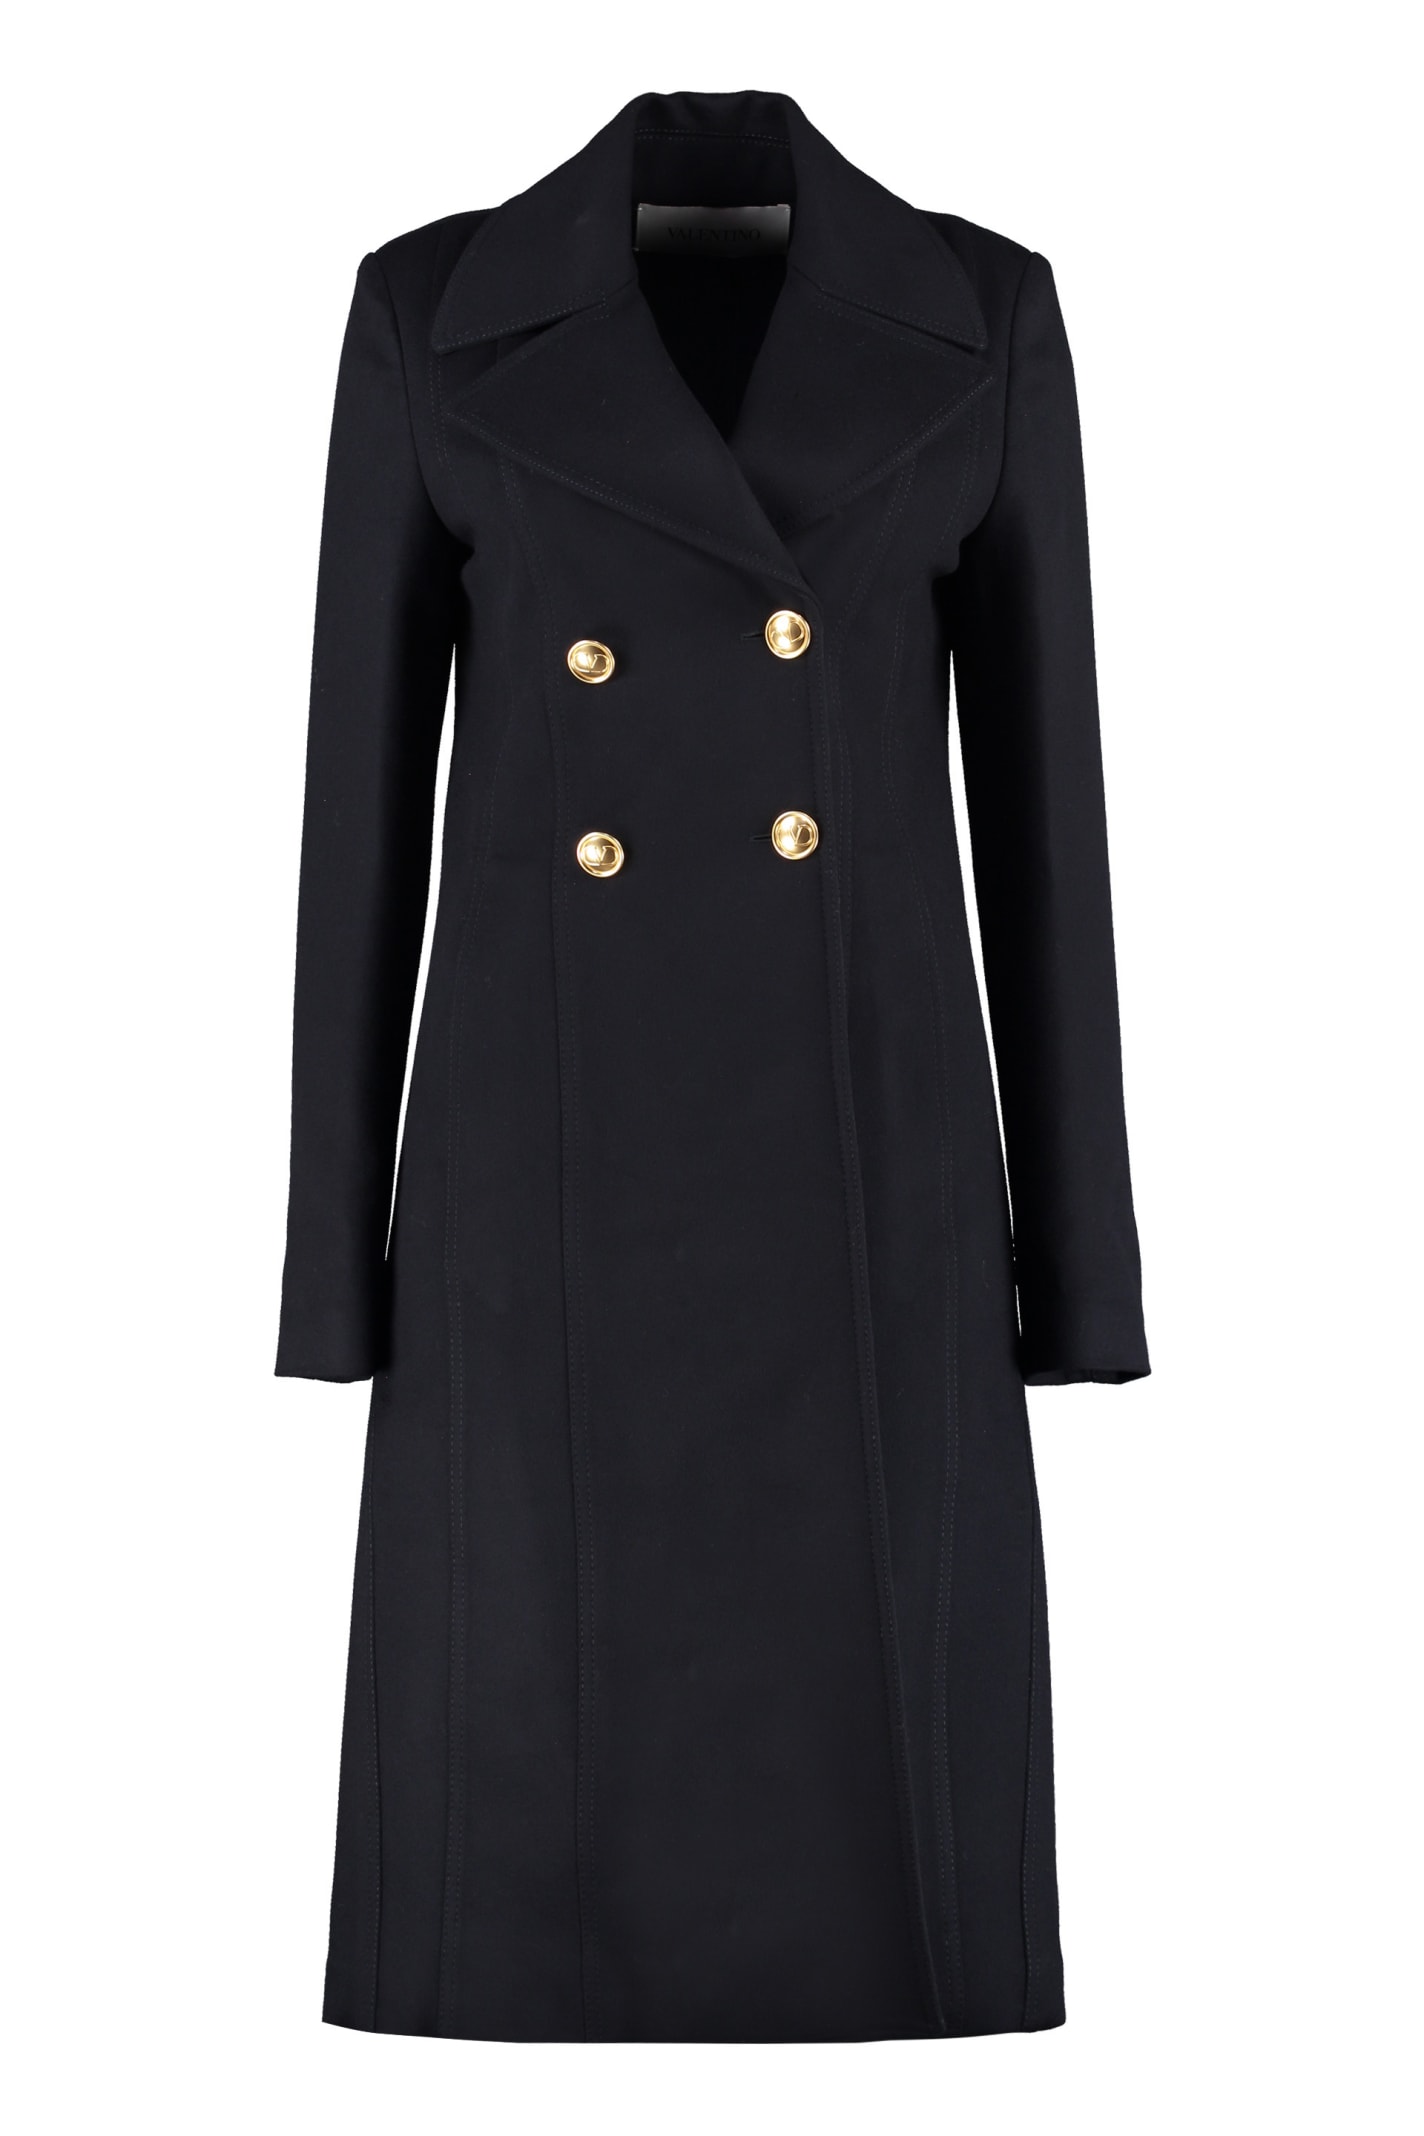 Valentino Double-breasted Wool And Cashmere Coat